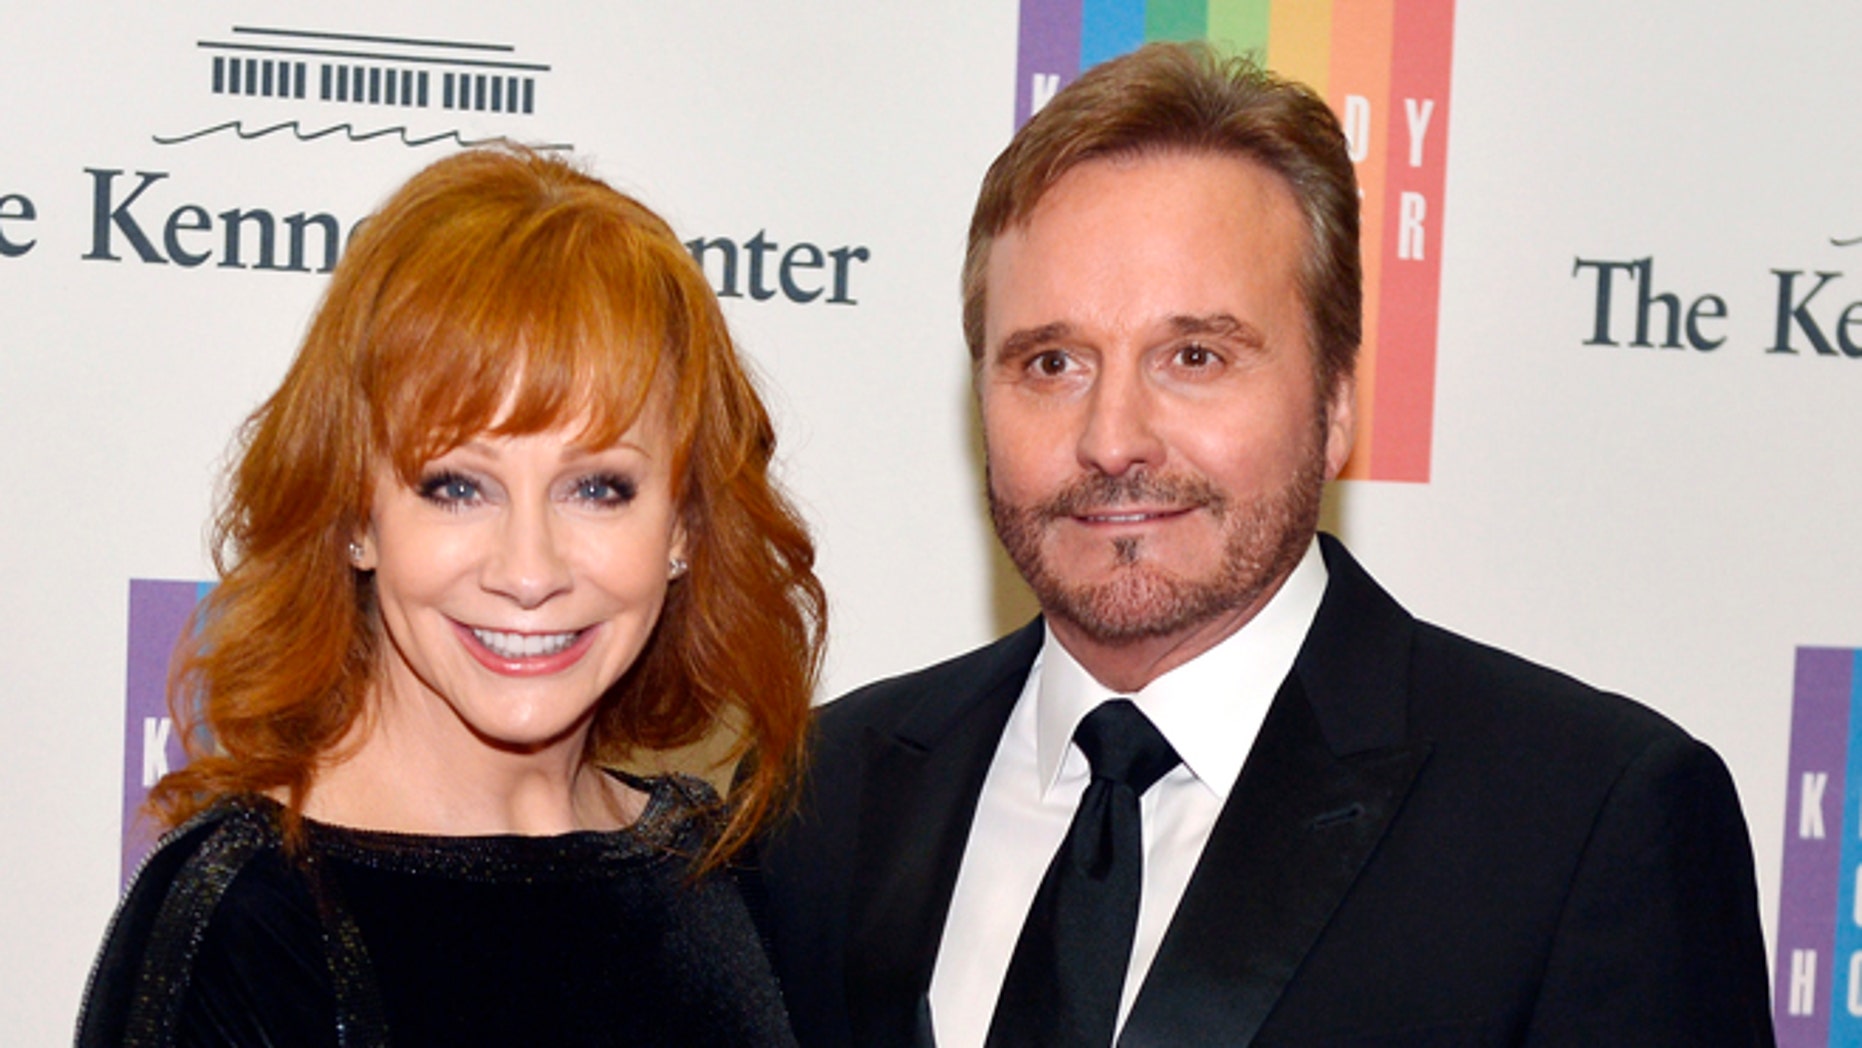 Reba McEntire Divorce wasn't her idea and faith helped her through it